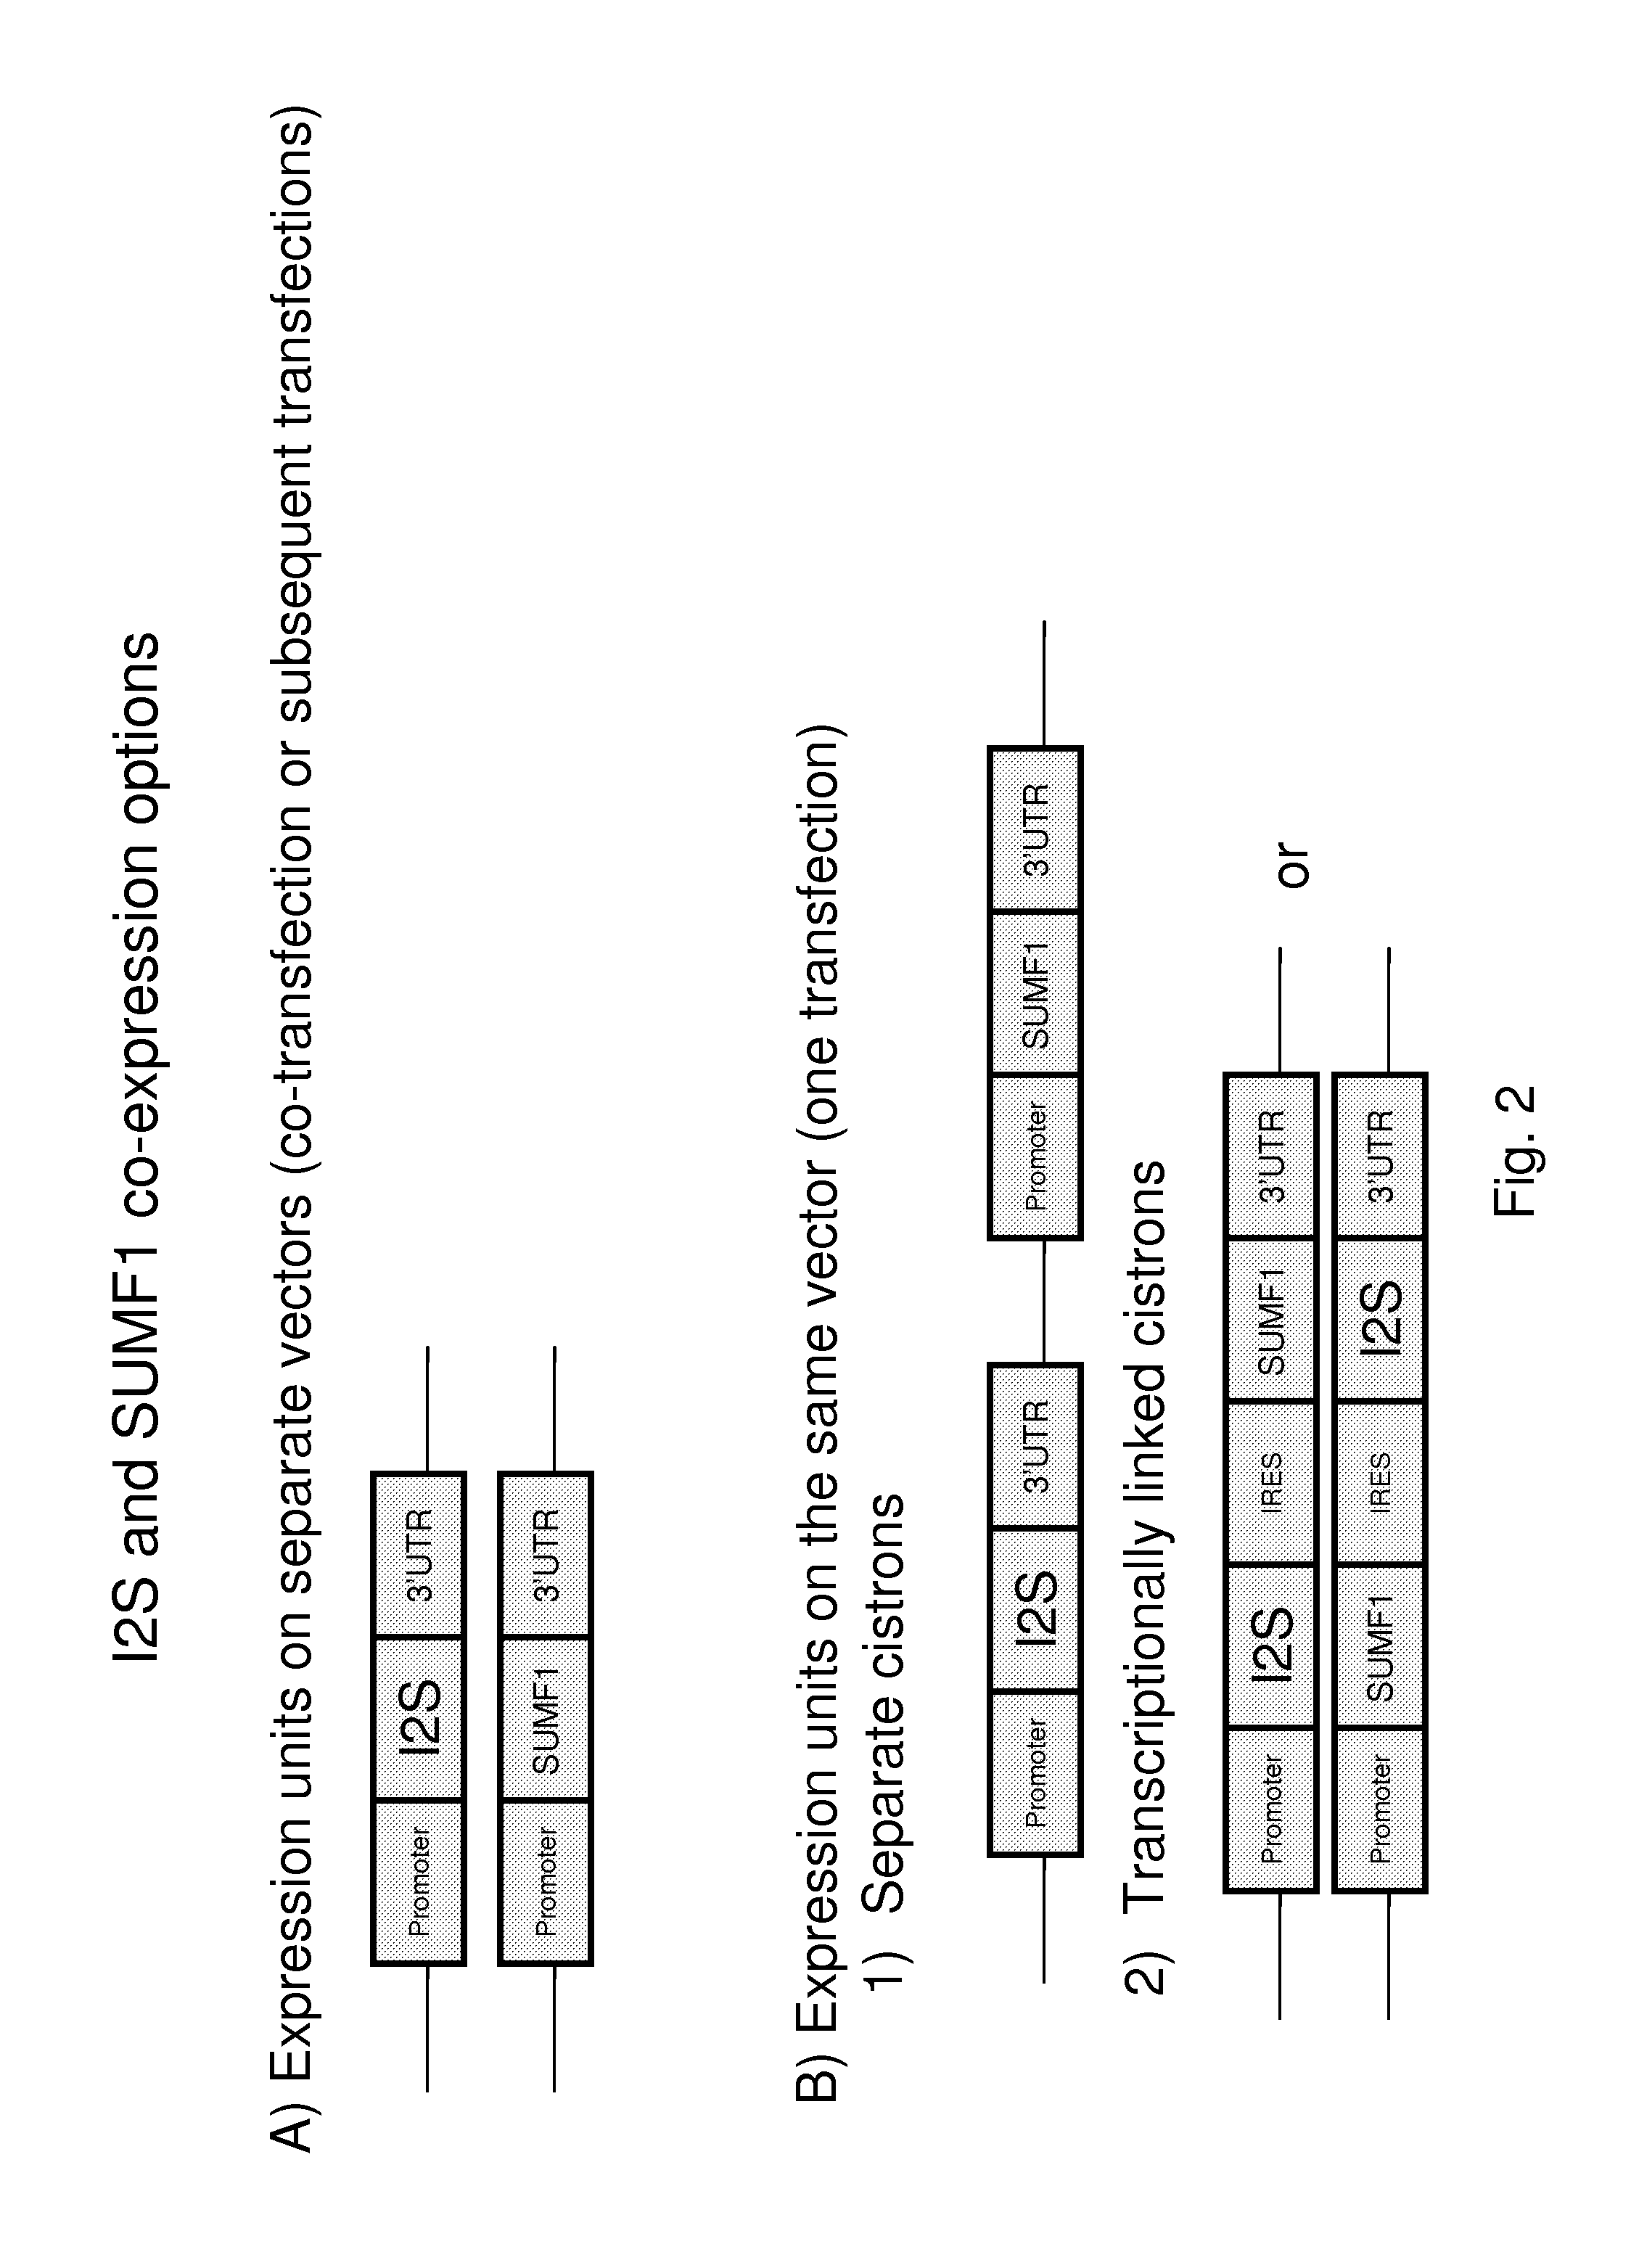 Cells for producing recombinant iduronate-2-sulfatase